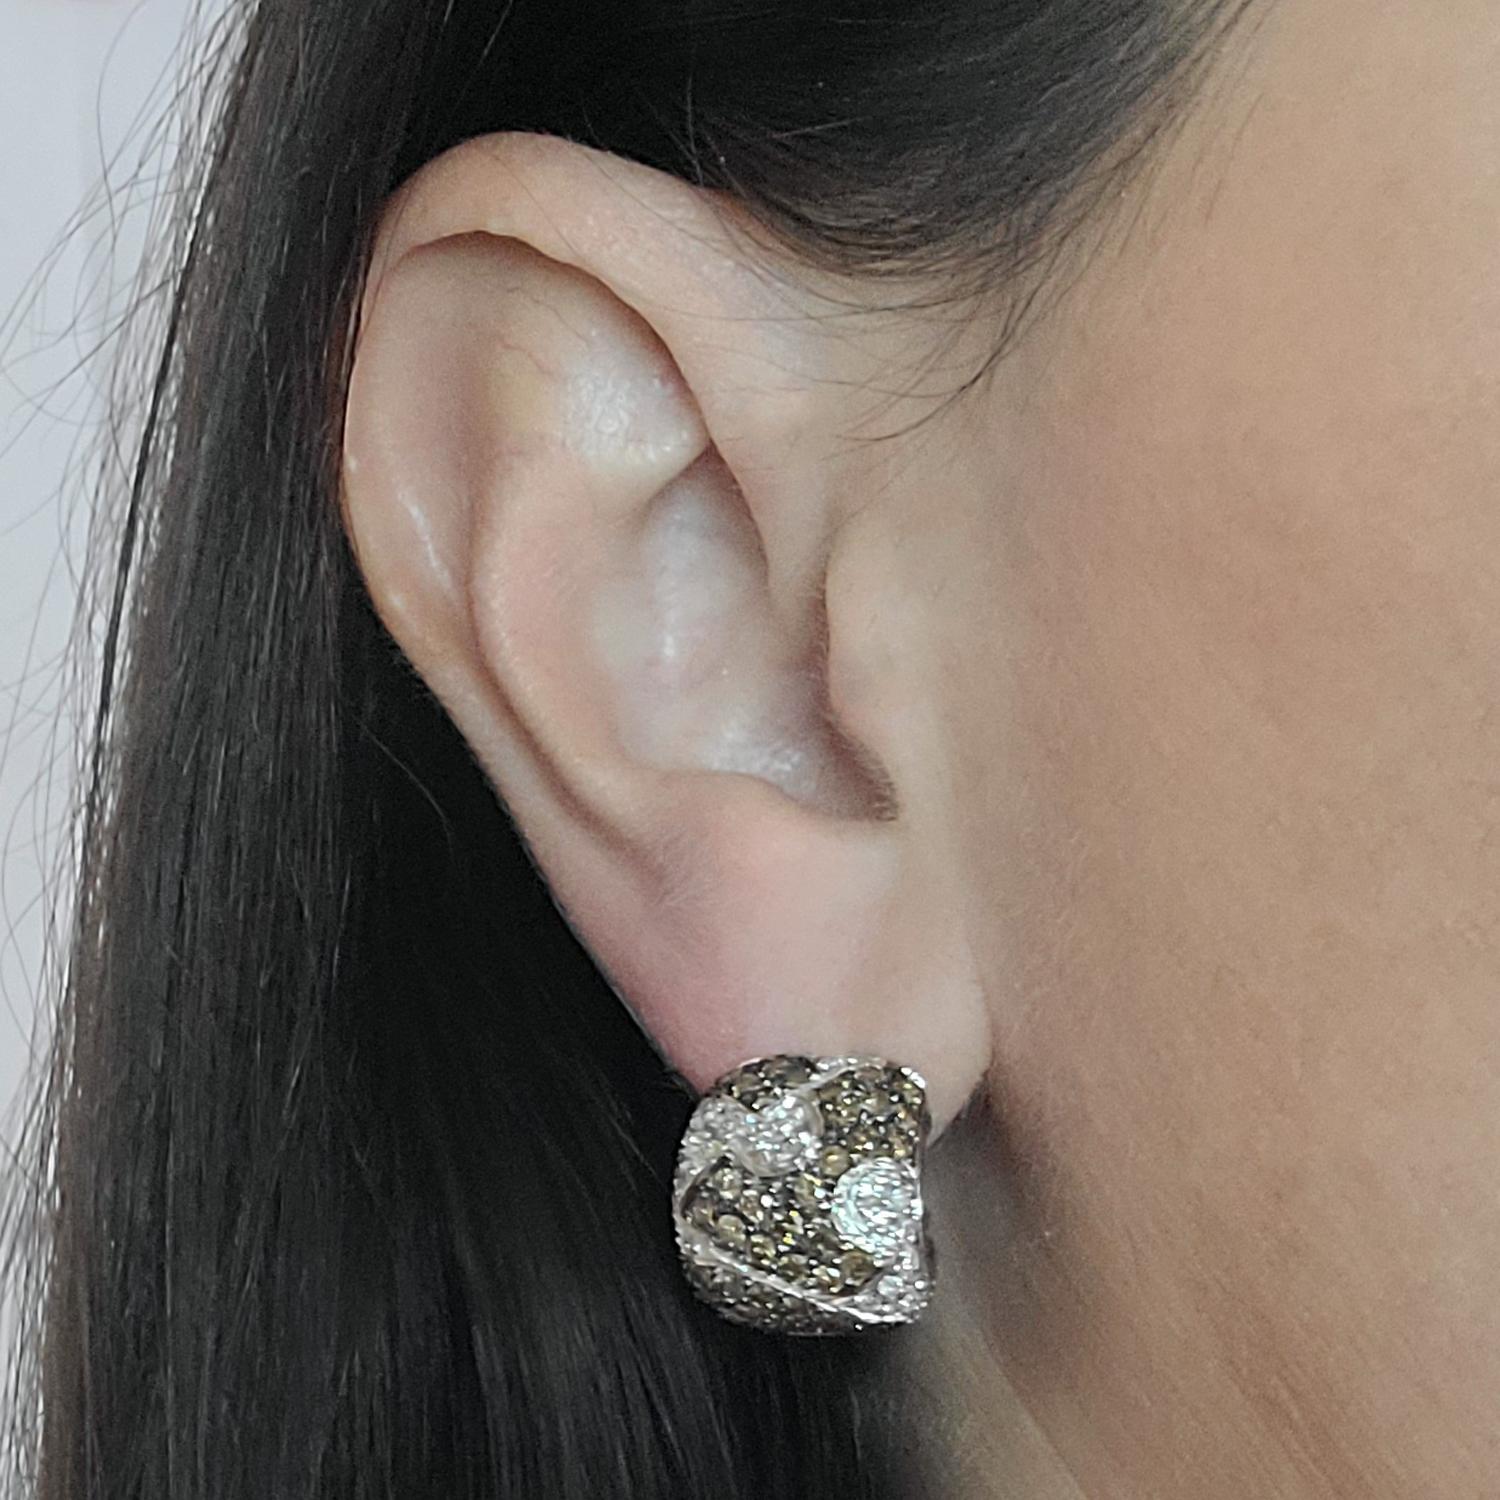 18 Karat White Gold Pave Huggie Earrings Featuring 82 Round Brown Diamonds and 68 White Diamonds of VS/SI Clarity Totaling Approximately 2.00 Carat. Pierced Post with Supportive Omega Clip Back and wrap Around Bottom; Post Removed Upon Request.